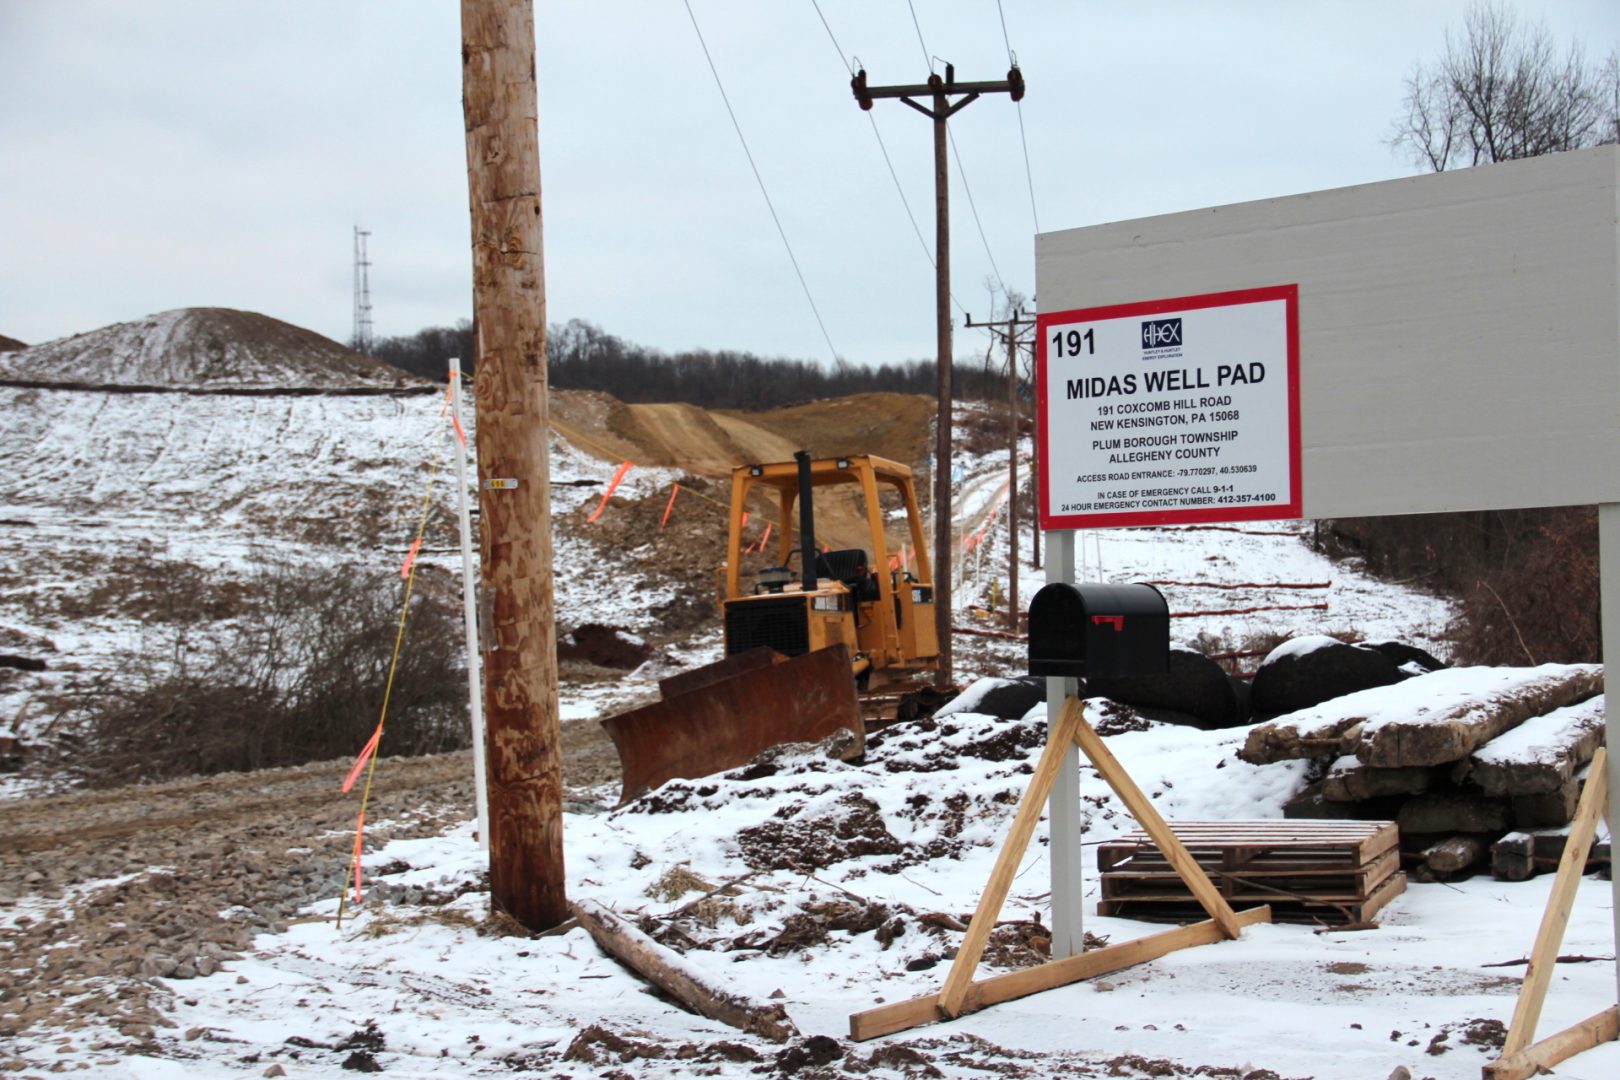 Huntley & Huntley Energy Exploration's Midas Well pad, the first Marcellus shale gas well in the Pittsburgh suburb of Plum.